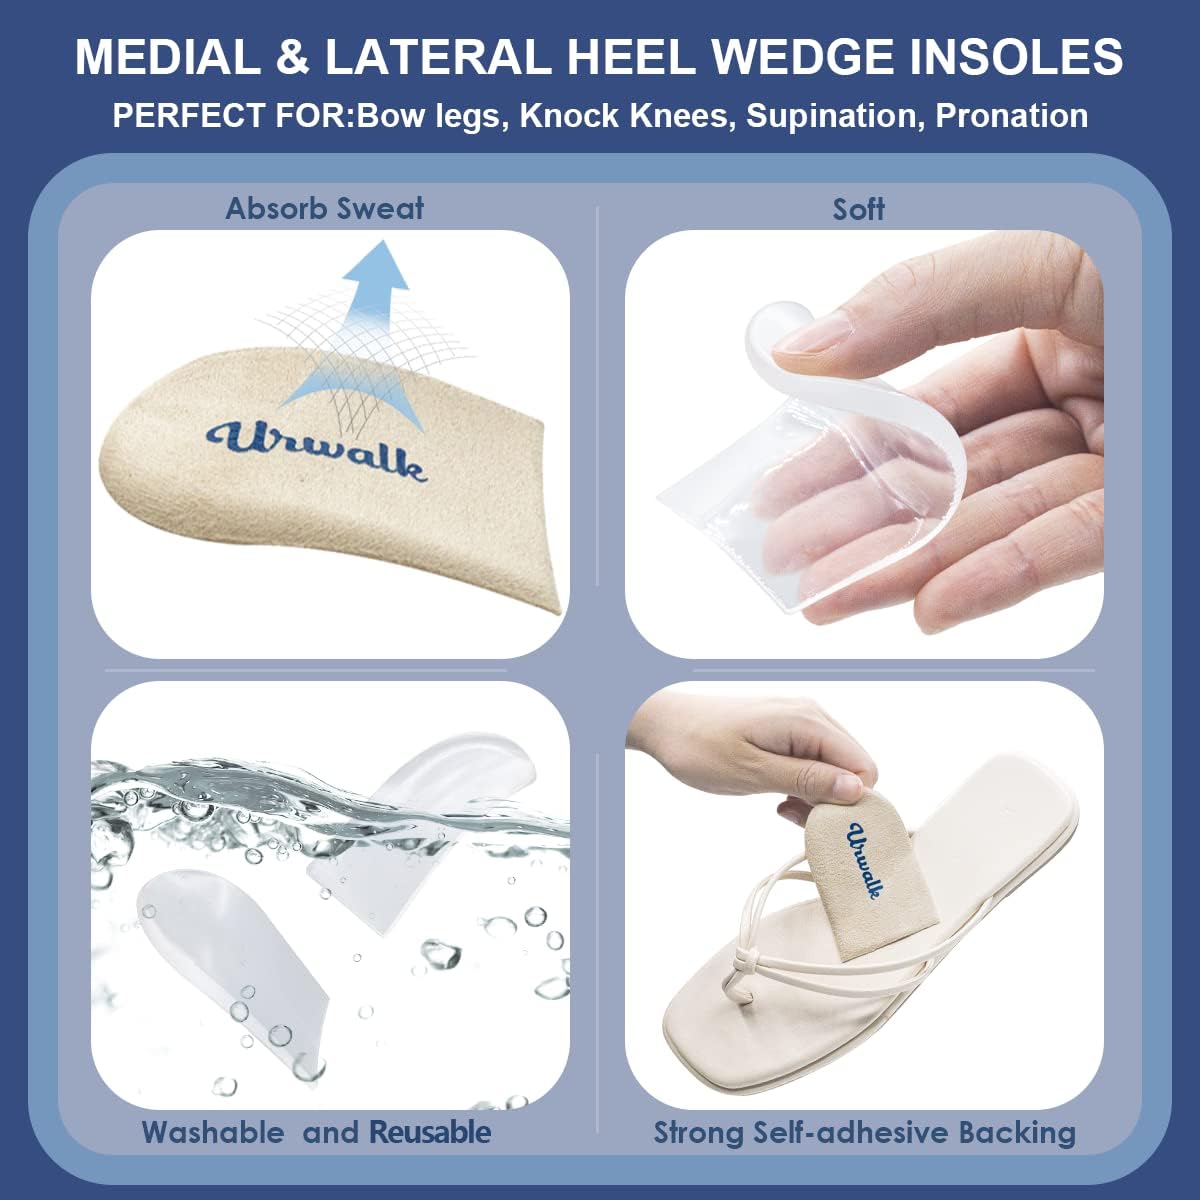 3 Layers Adjustable Supination Over Pronation Corrective Shoe Inserts Medial Lateral Heel Wedge Lifts Self-Adhesive Gel Insoles for Foot Alignment, Knock Knee Pain - 6 Pieces (Beige)